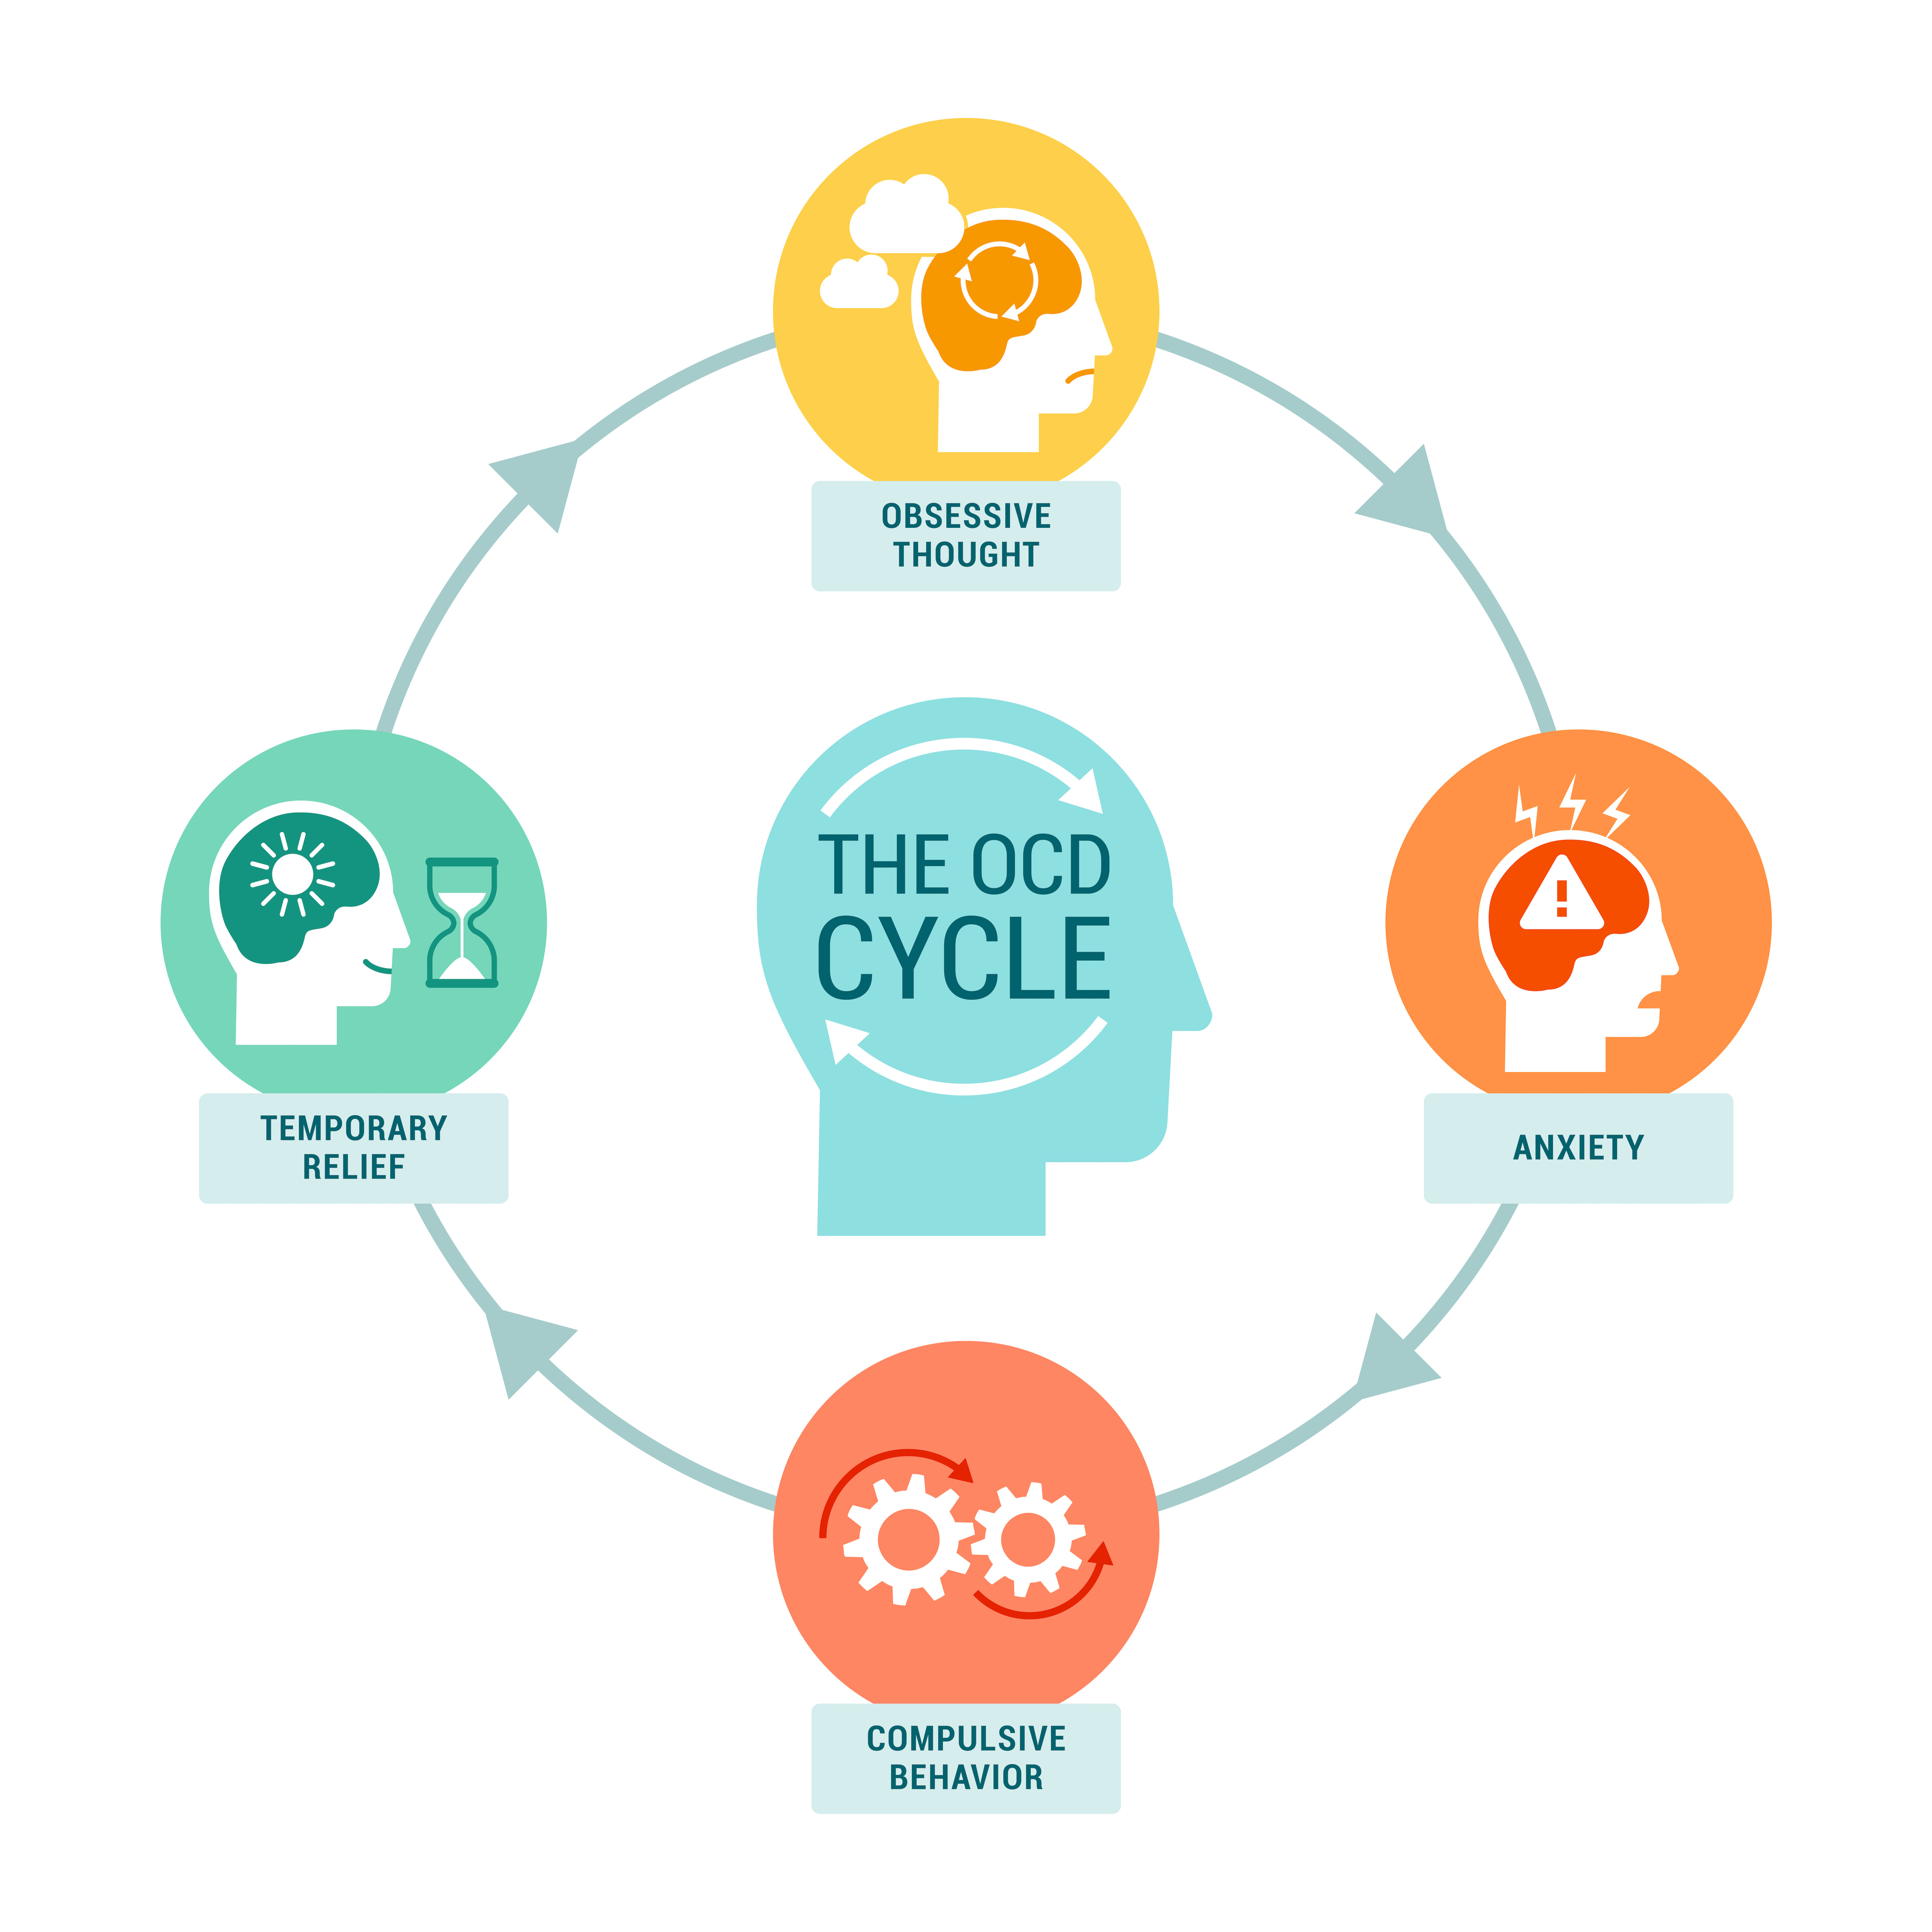 Diagram illustrating the OCD cycle: Obsessive Thought, Anxiety, Compulsive Behavior, and Temporary Relief, depicted with icons in a circular flow